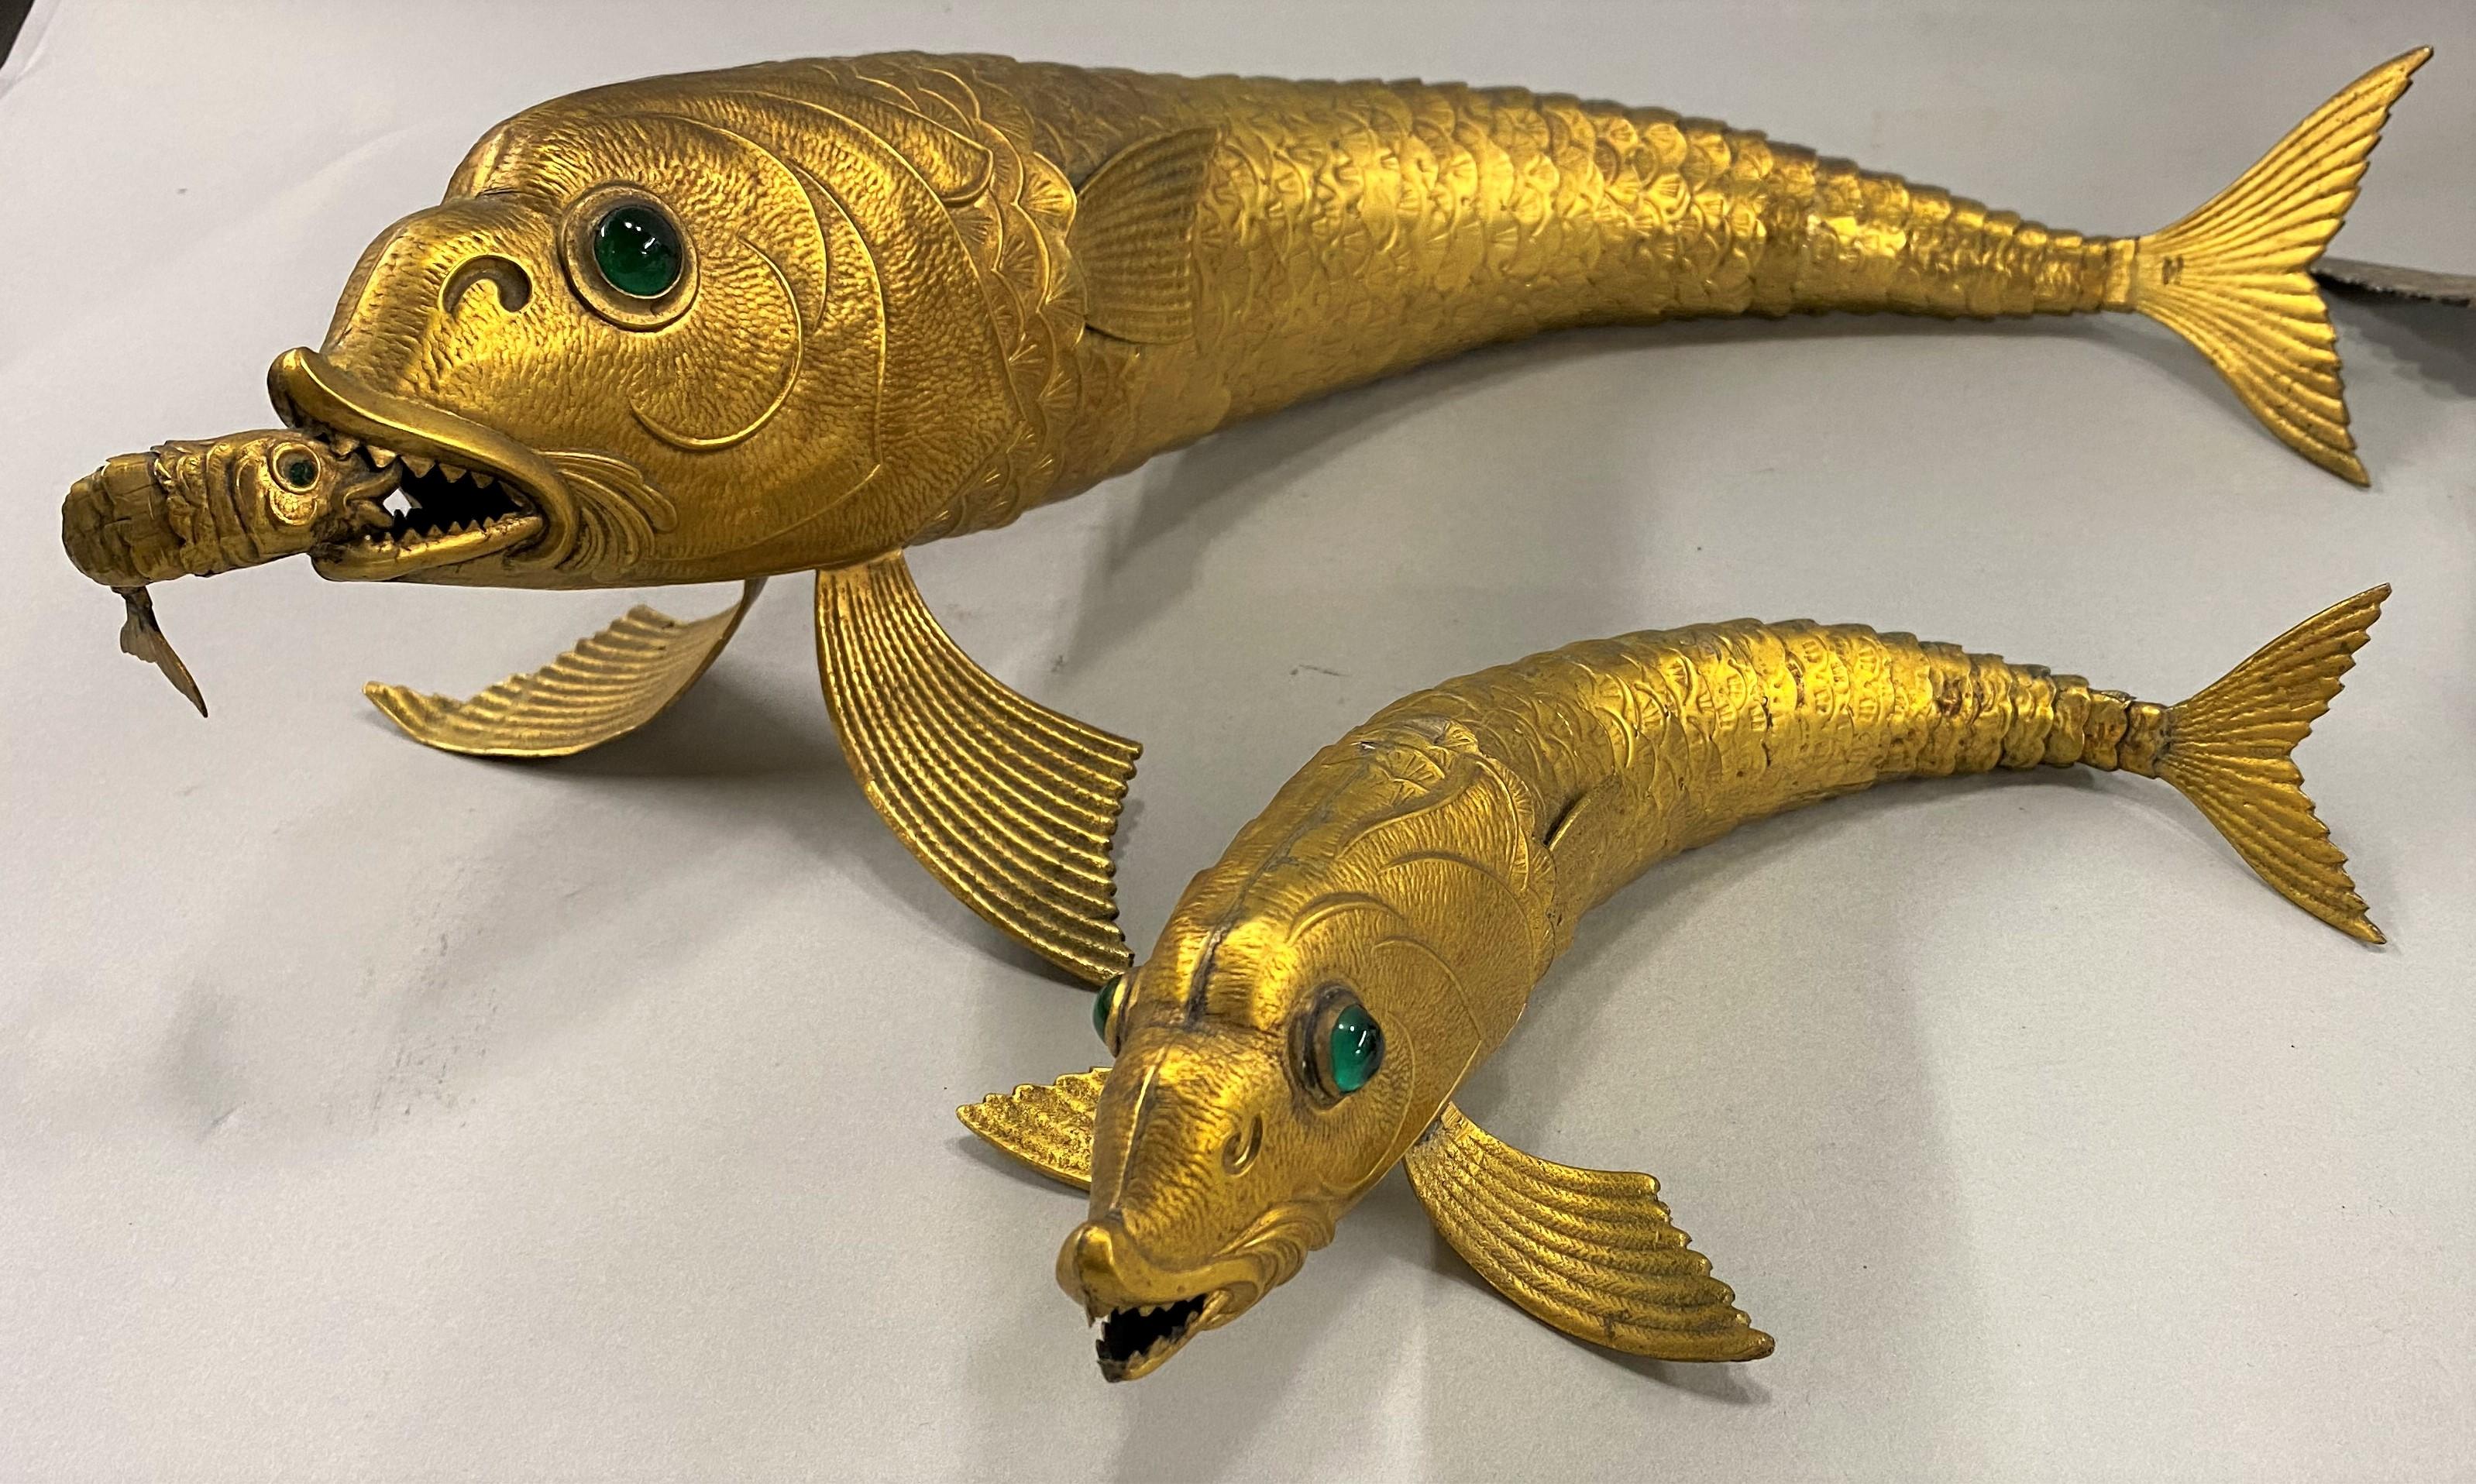 A wonderful collection of articulated silver fish, including two gilt fish stamped “Made in Spain,” and four silver fish, one marked “Sterling 925, Italy” with faint hallmark, another marked VEGA 18 with other illegible hallmarks, and two others